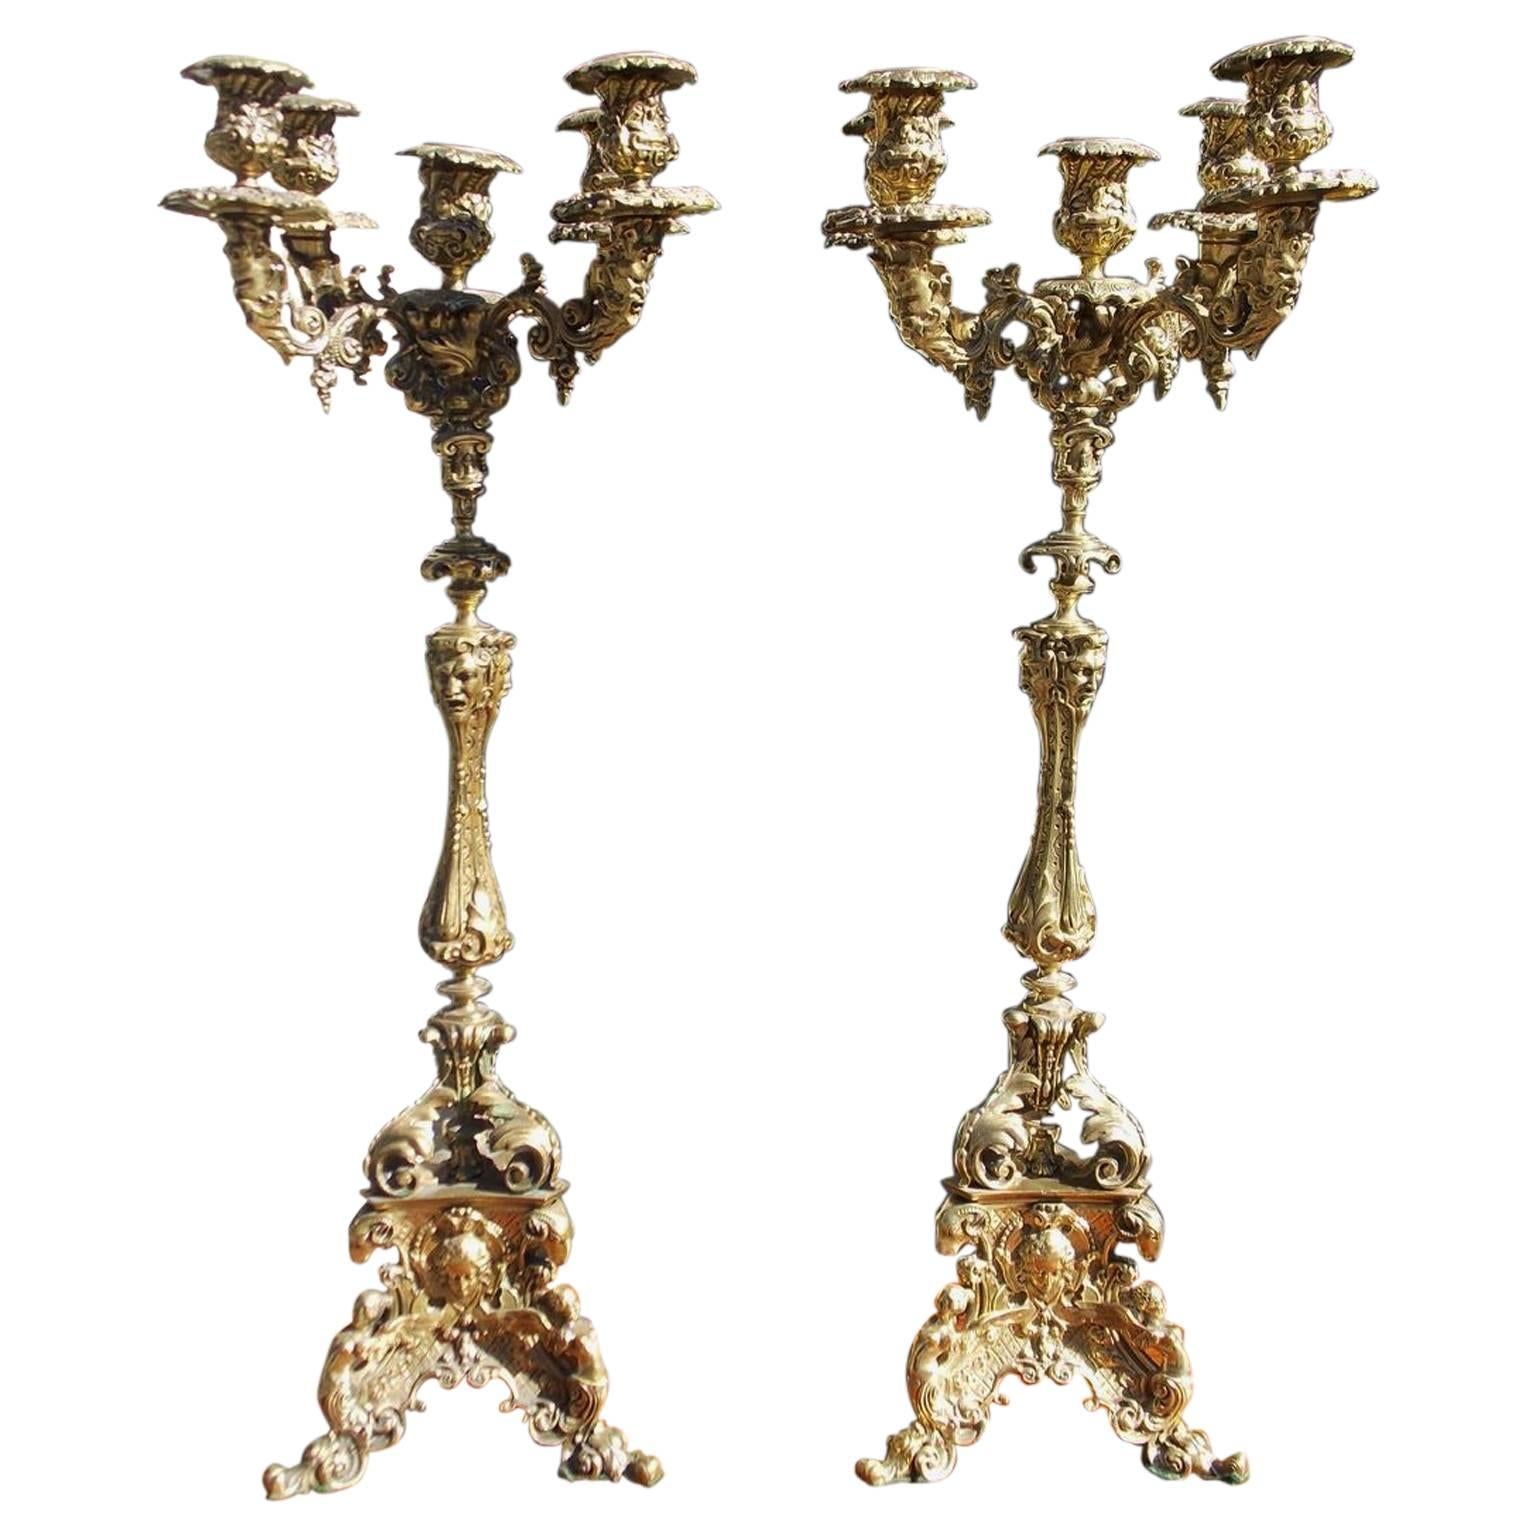 Pair of Italian Bronze Figural and Floral Candelabras, Circa 1830 For Sale